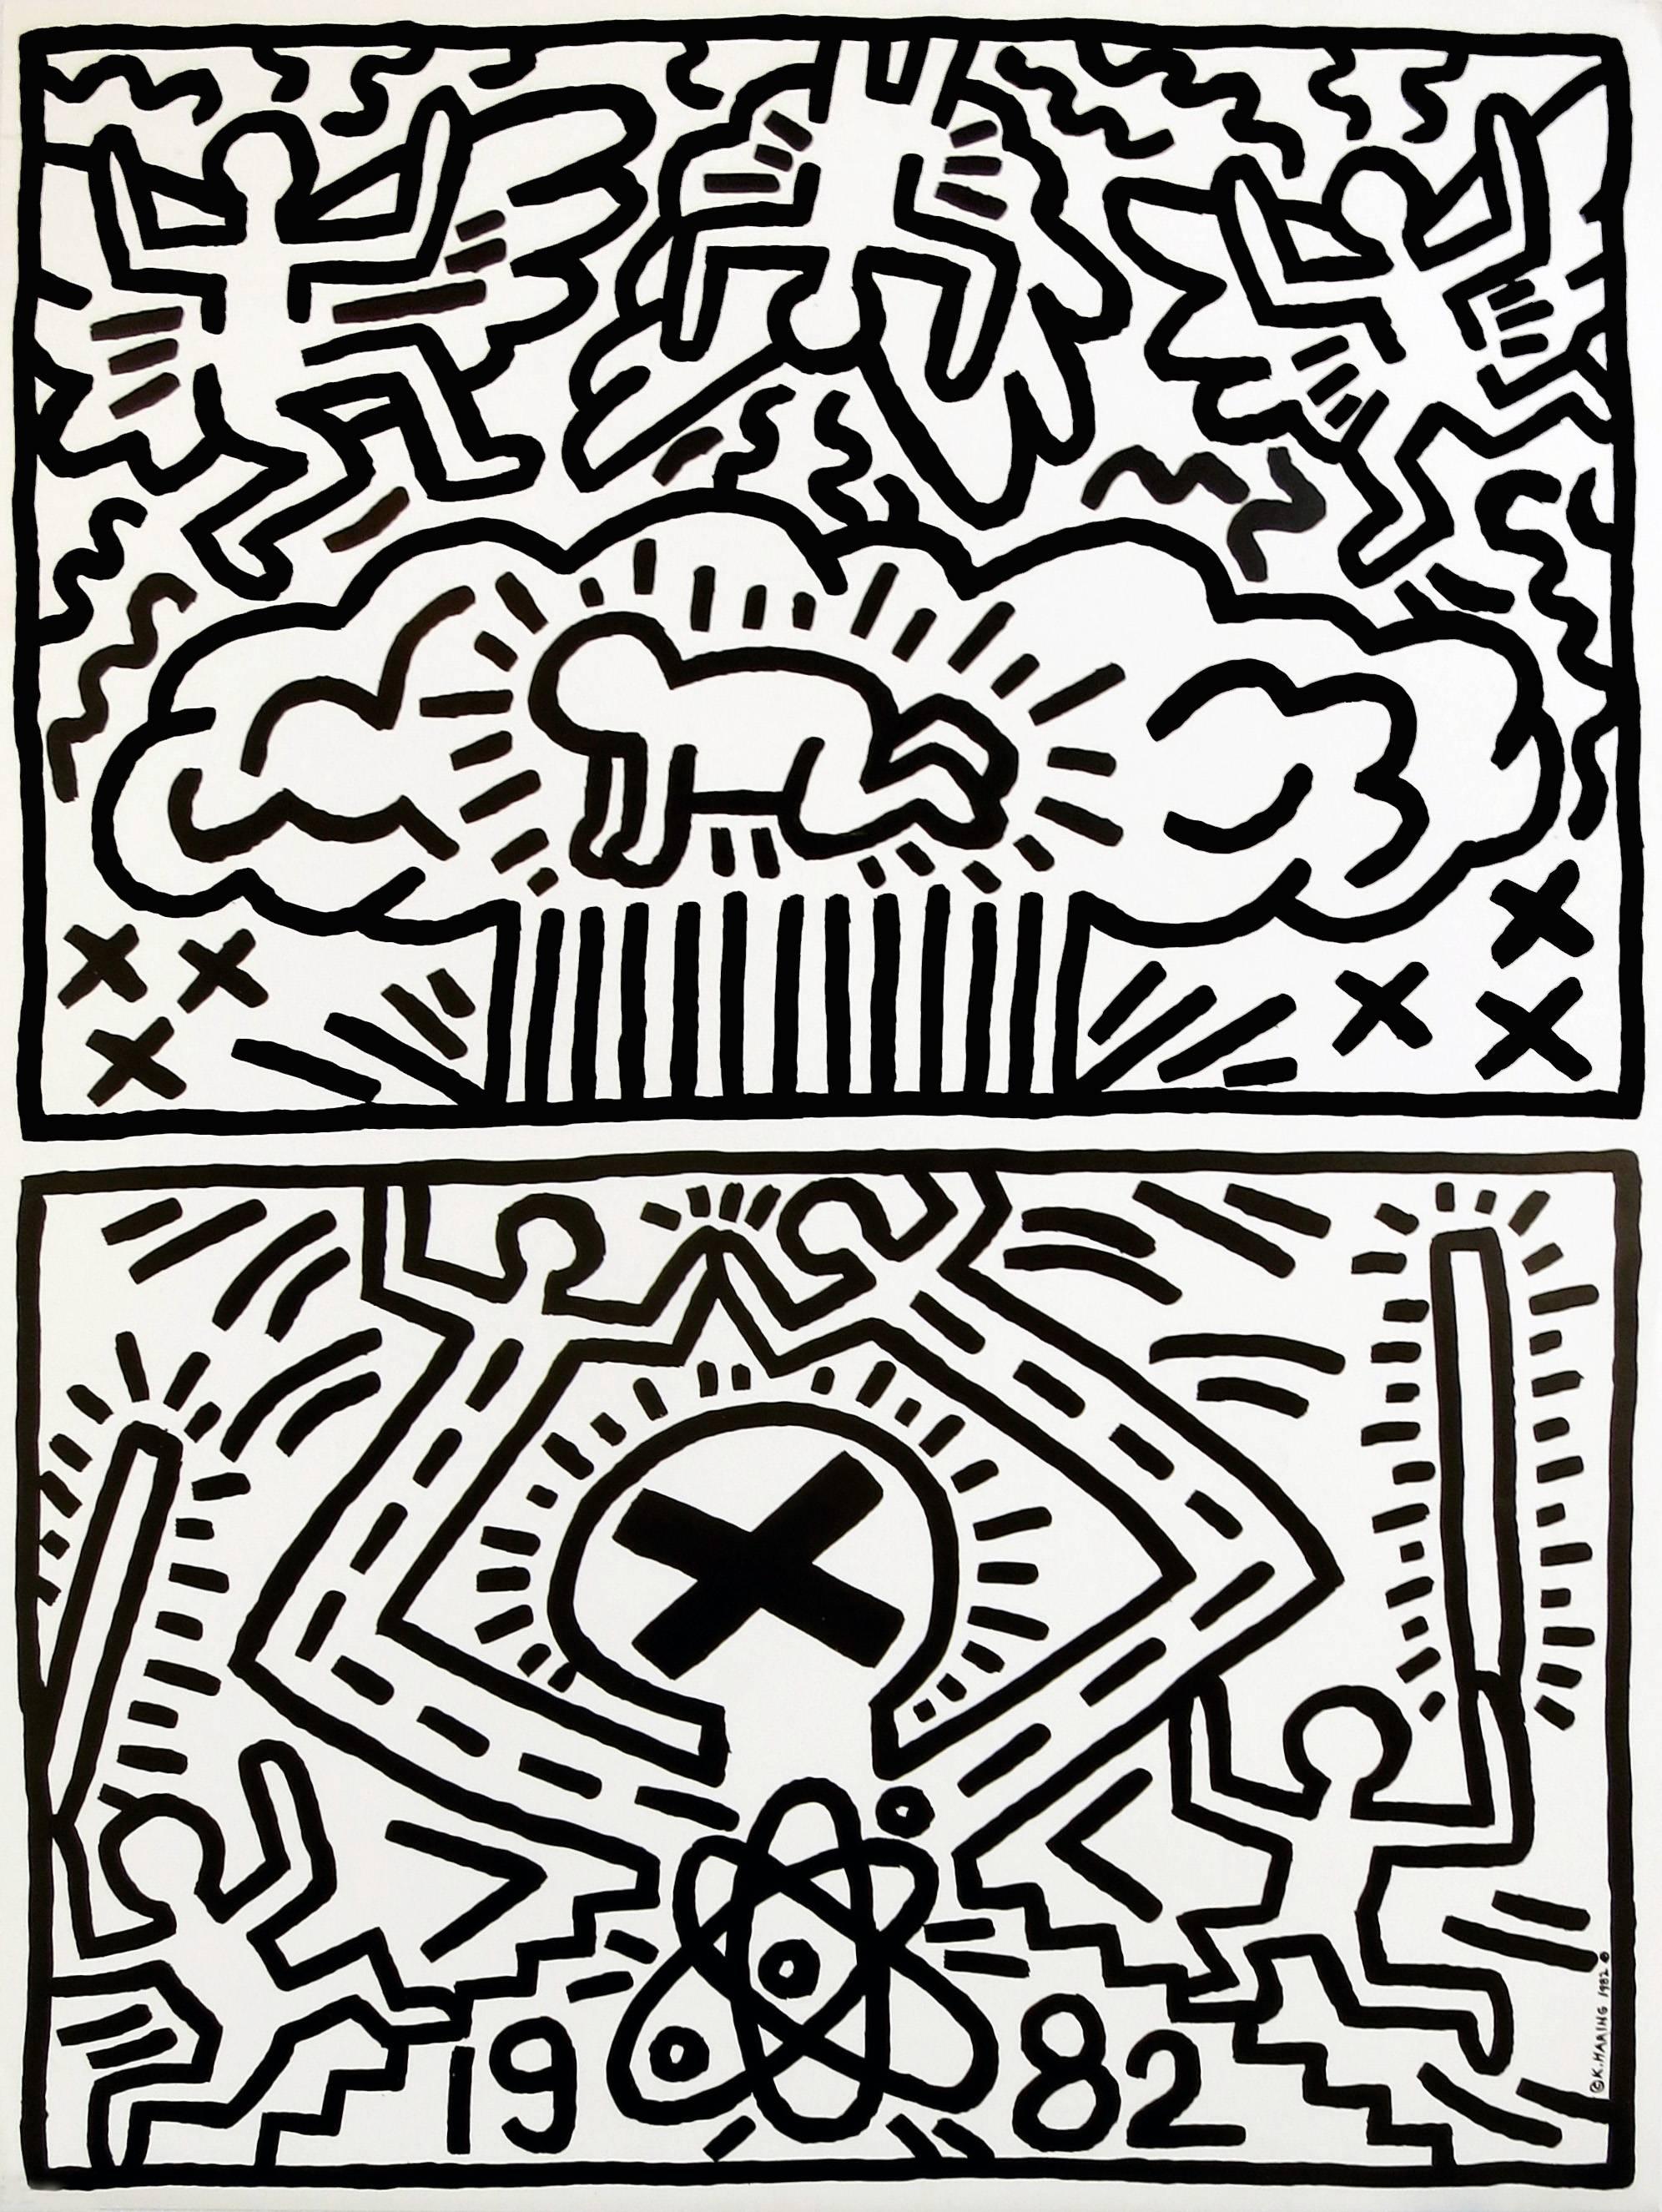 Nuclear Disarmament - Print by Keith Haring